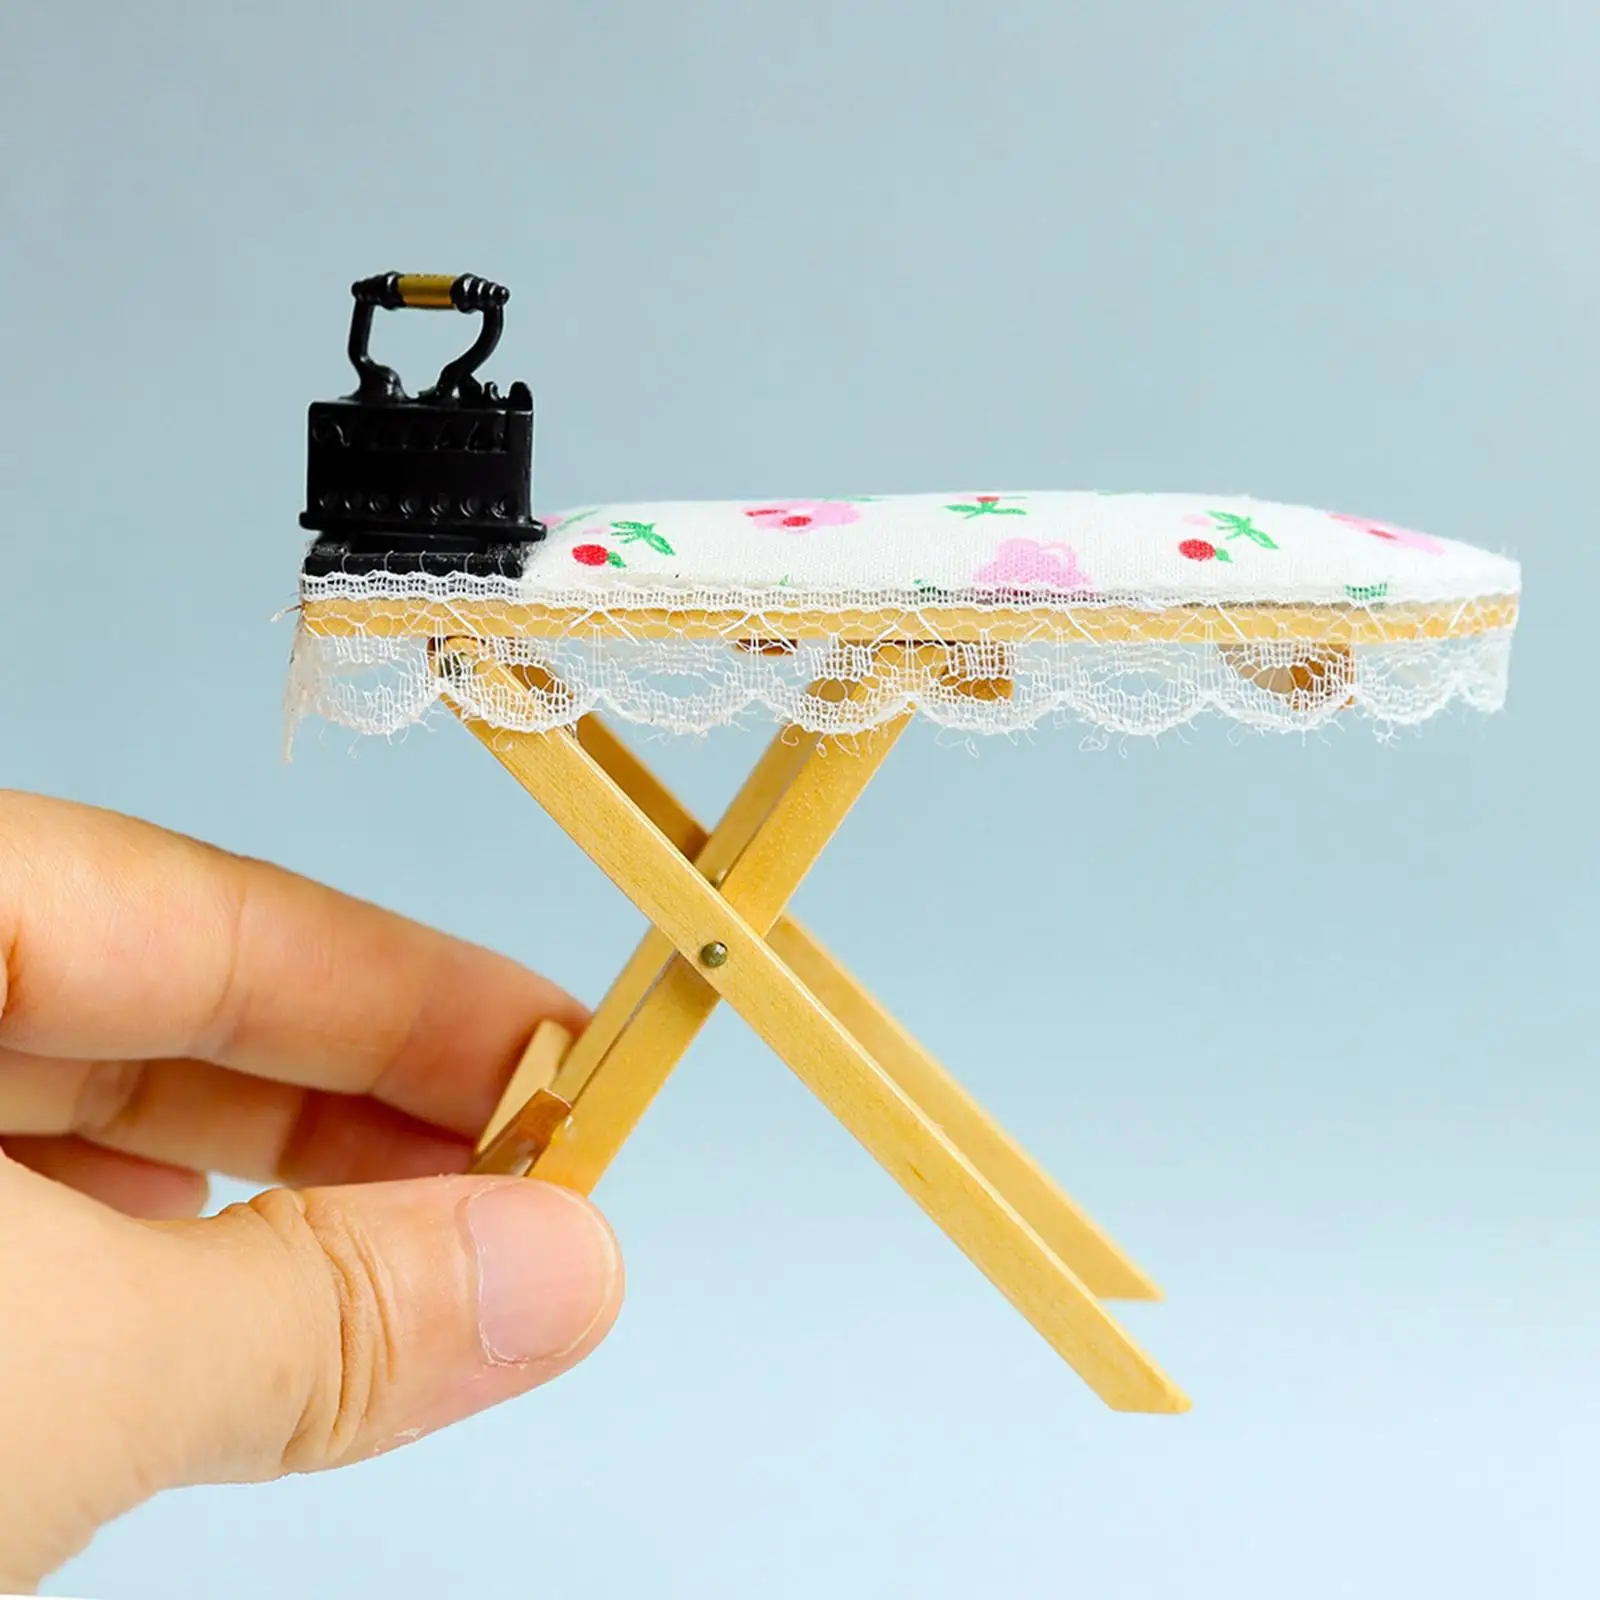 Dollhouse Miniature Ironing Set 1/12 Scale Vintage Steam Iron Model Toy for DIY Fairy Garden Diorama Micro Landscape Decoration